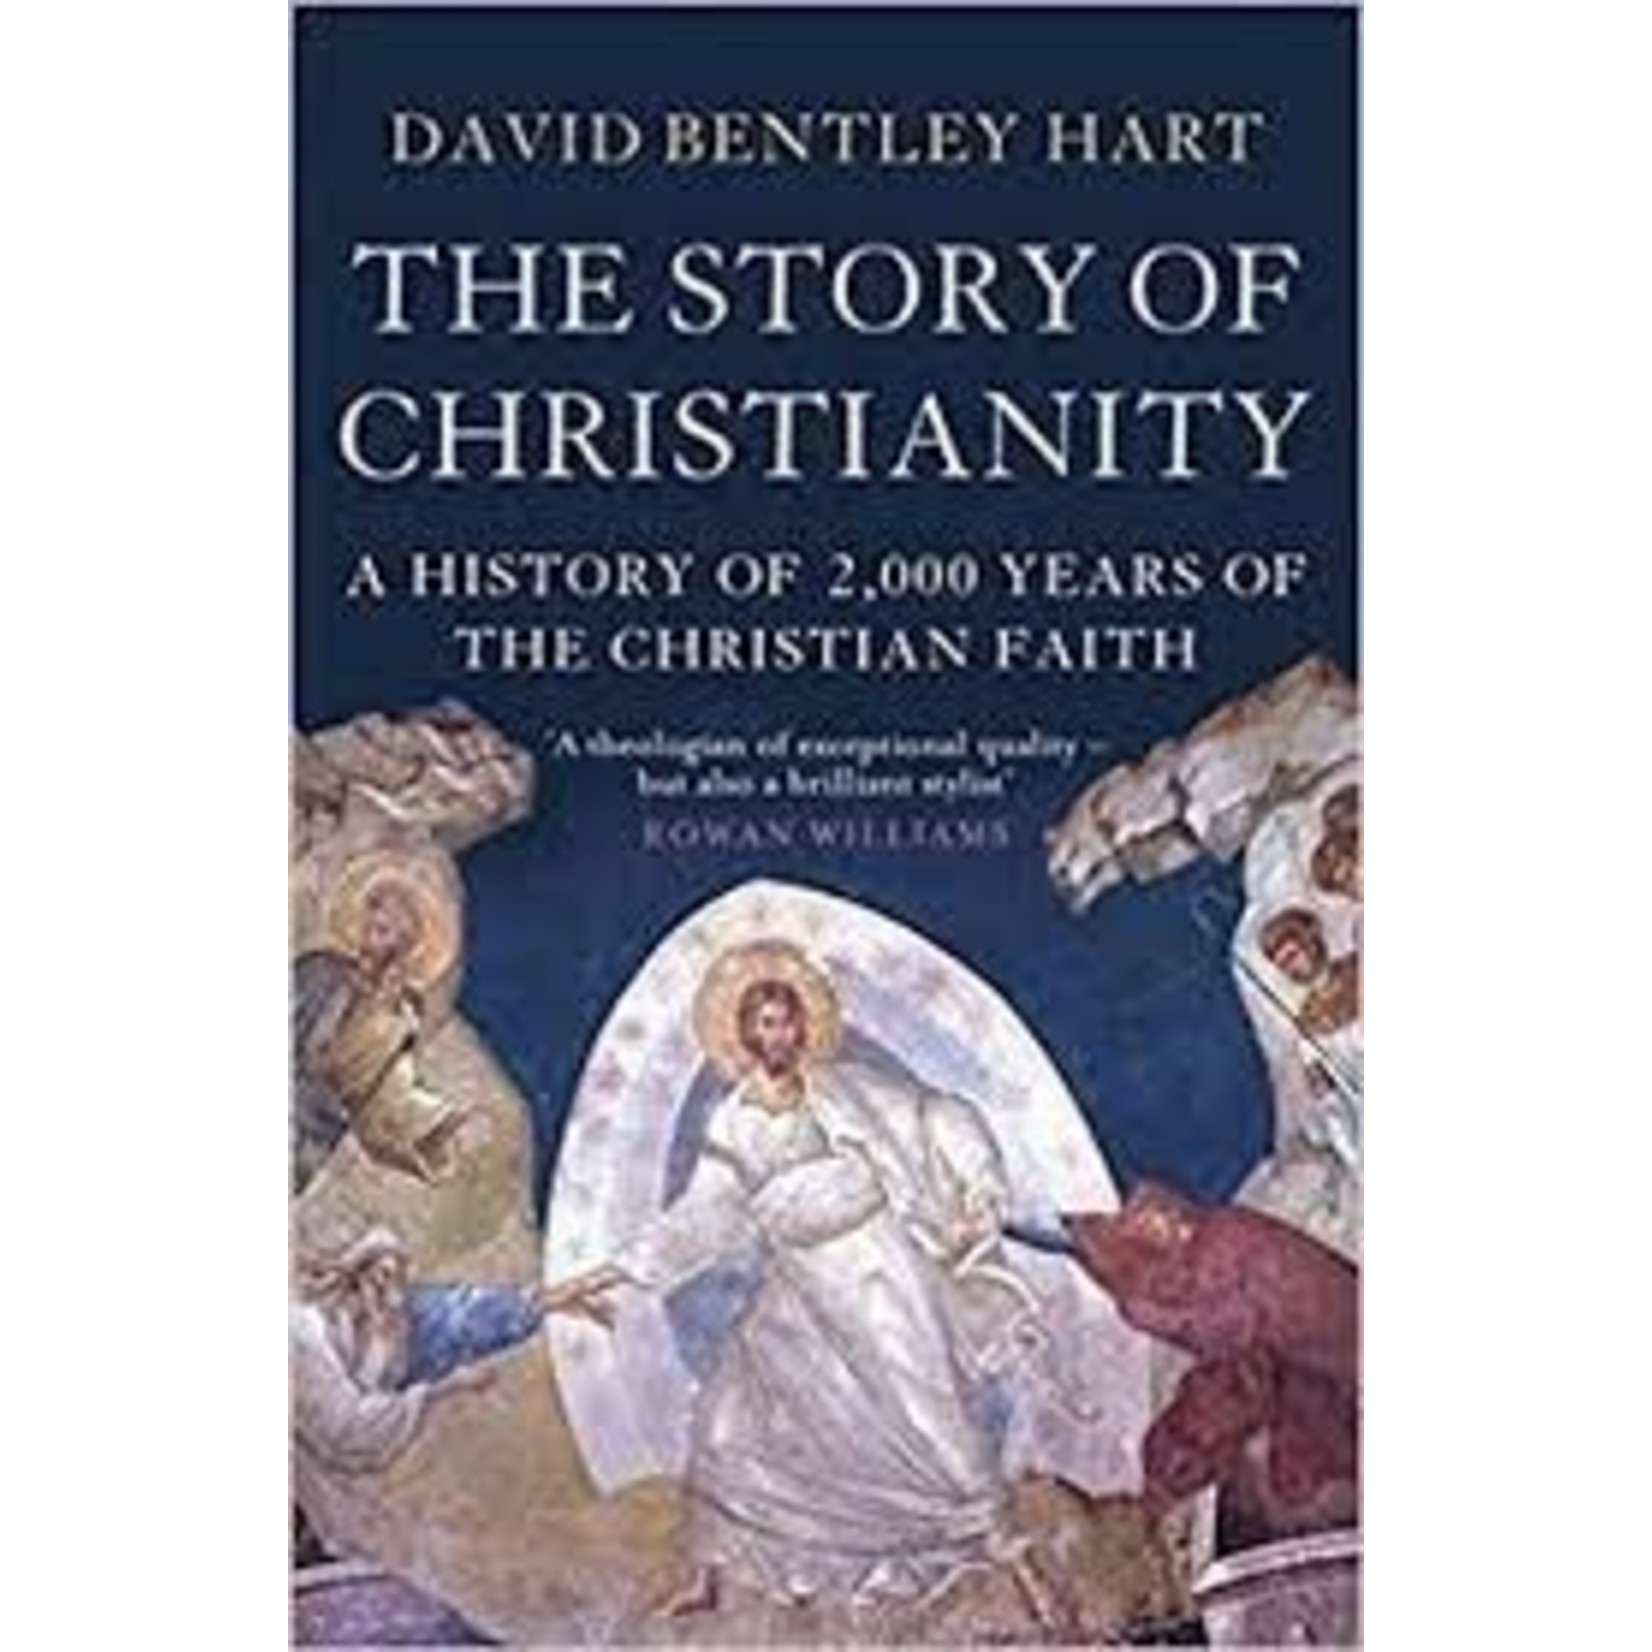 The Story of Christianity: A History of 2,000 years of the Christian Faith